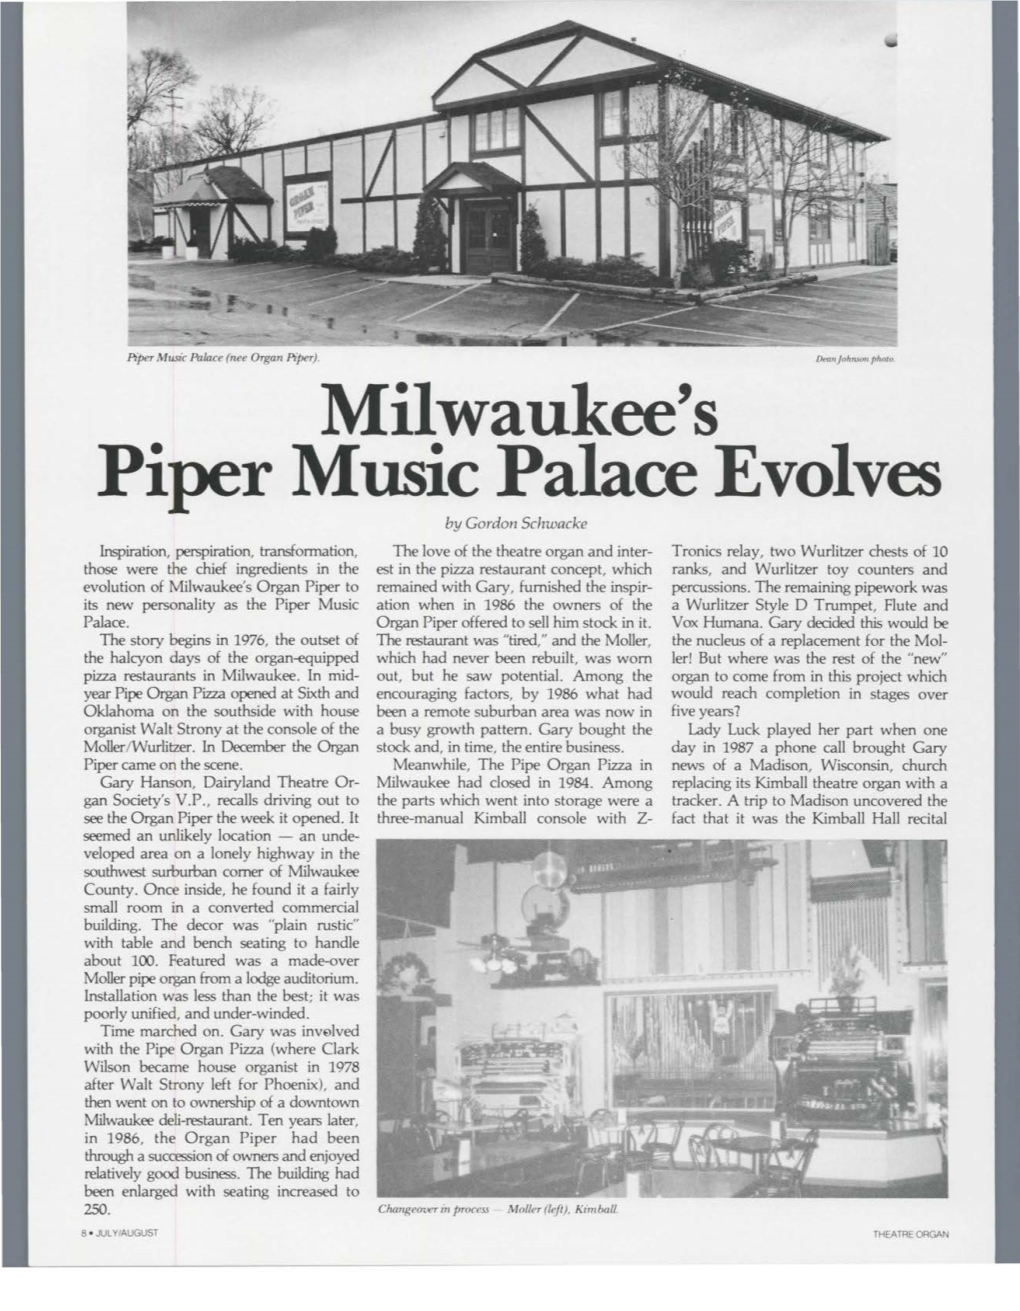 Milwaukee's Piper Music Palace Evolves